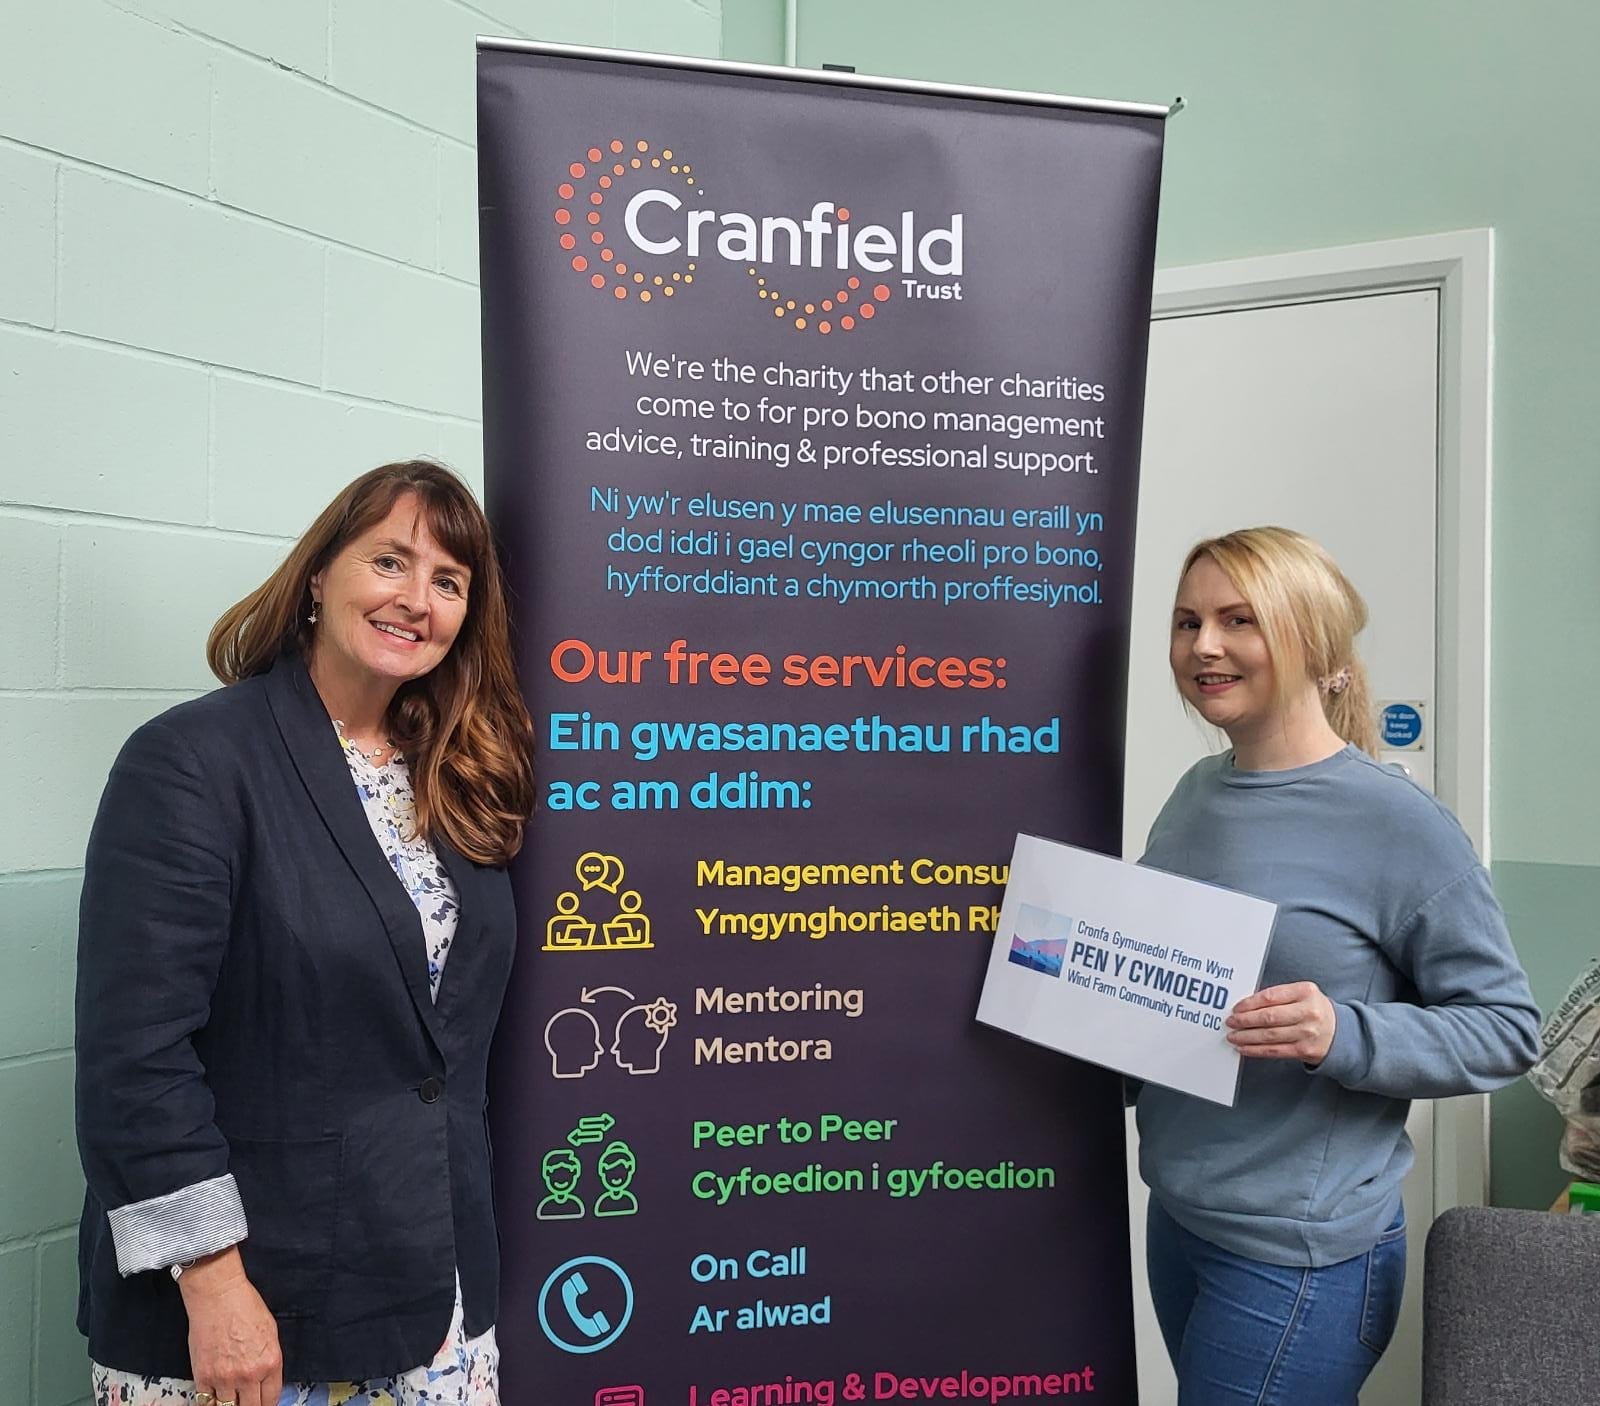 Empowering Communities: Pen y Cymoedd Joins Forces with Neath Port Talbot CVS, Cranfield Trust, and Interlink RCT to Enhance Support for Charitable Organisations